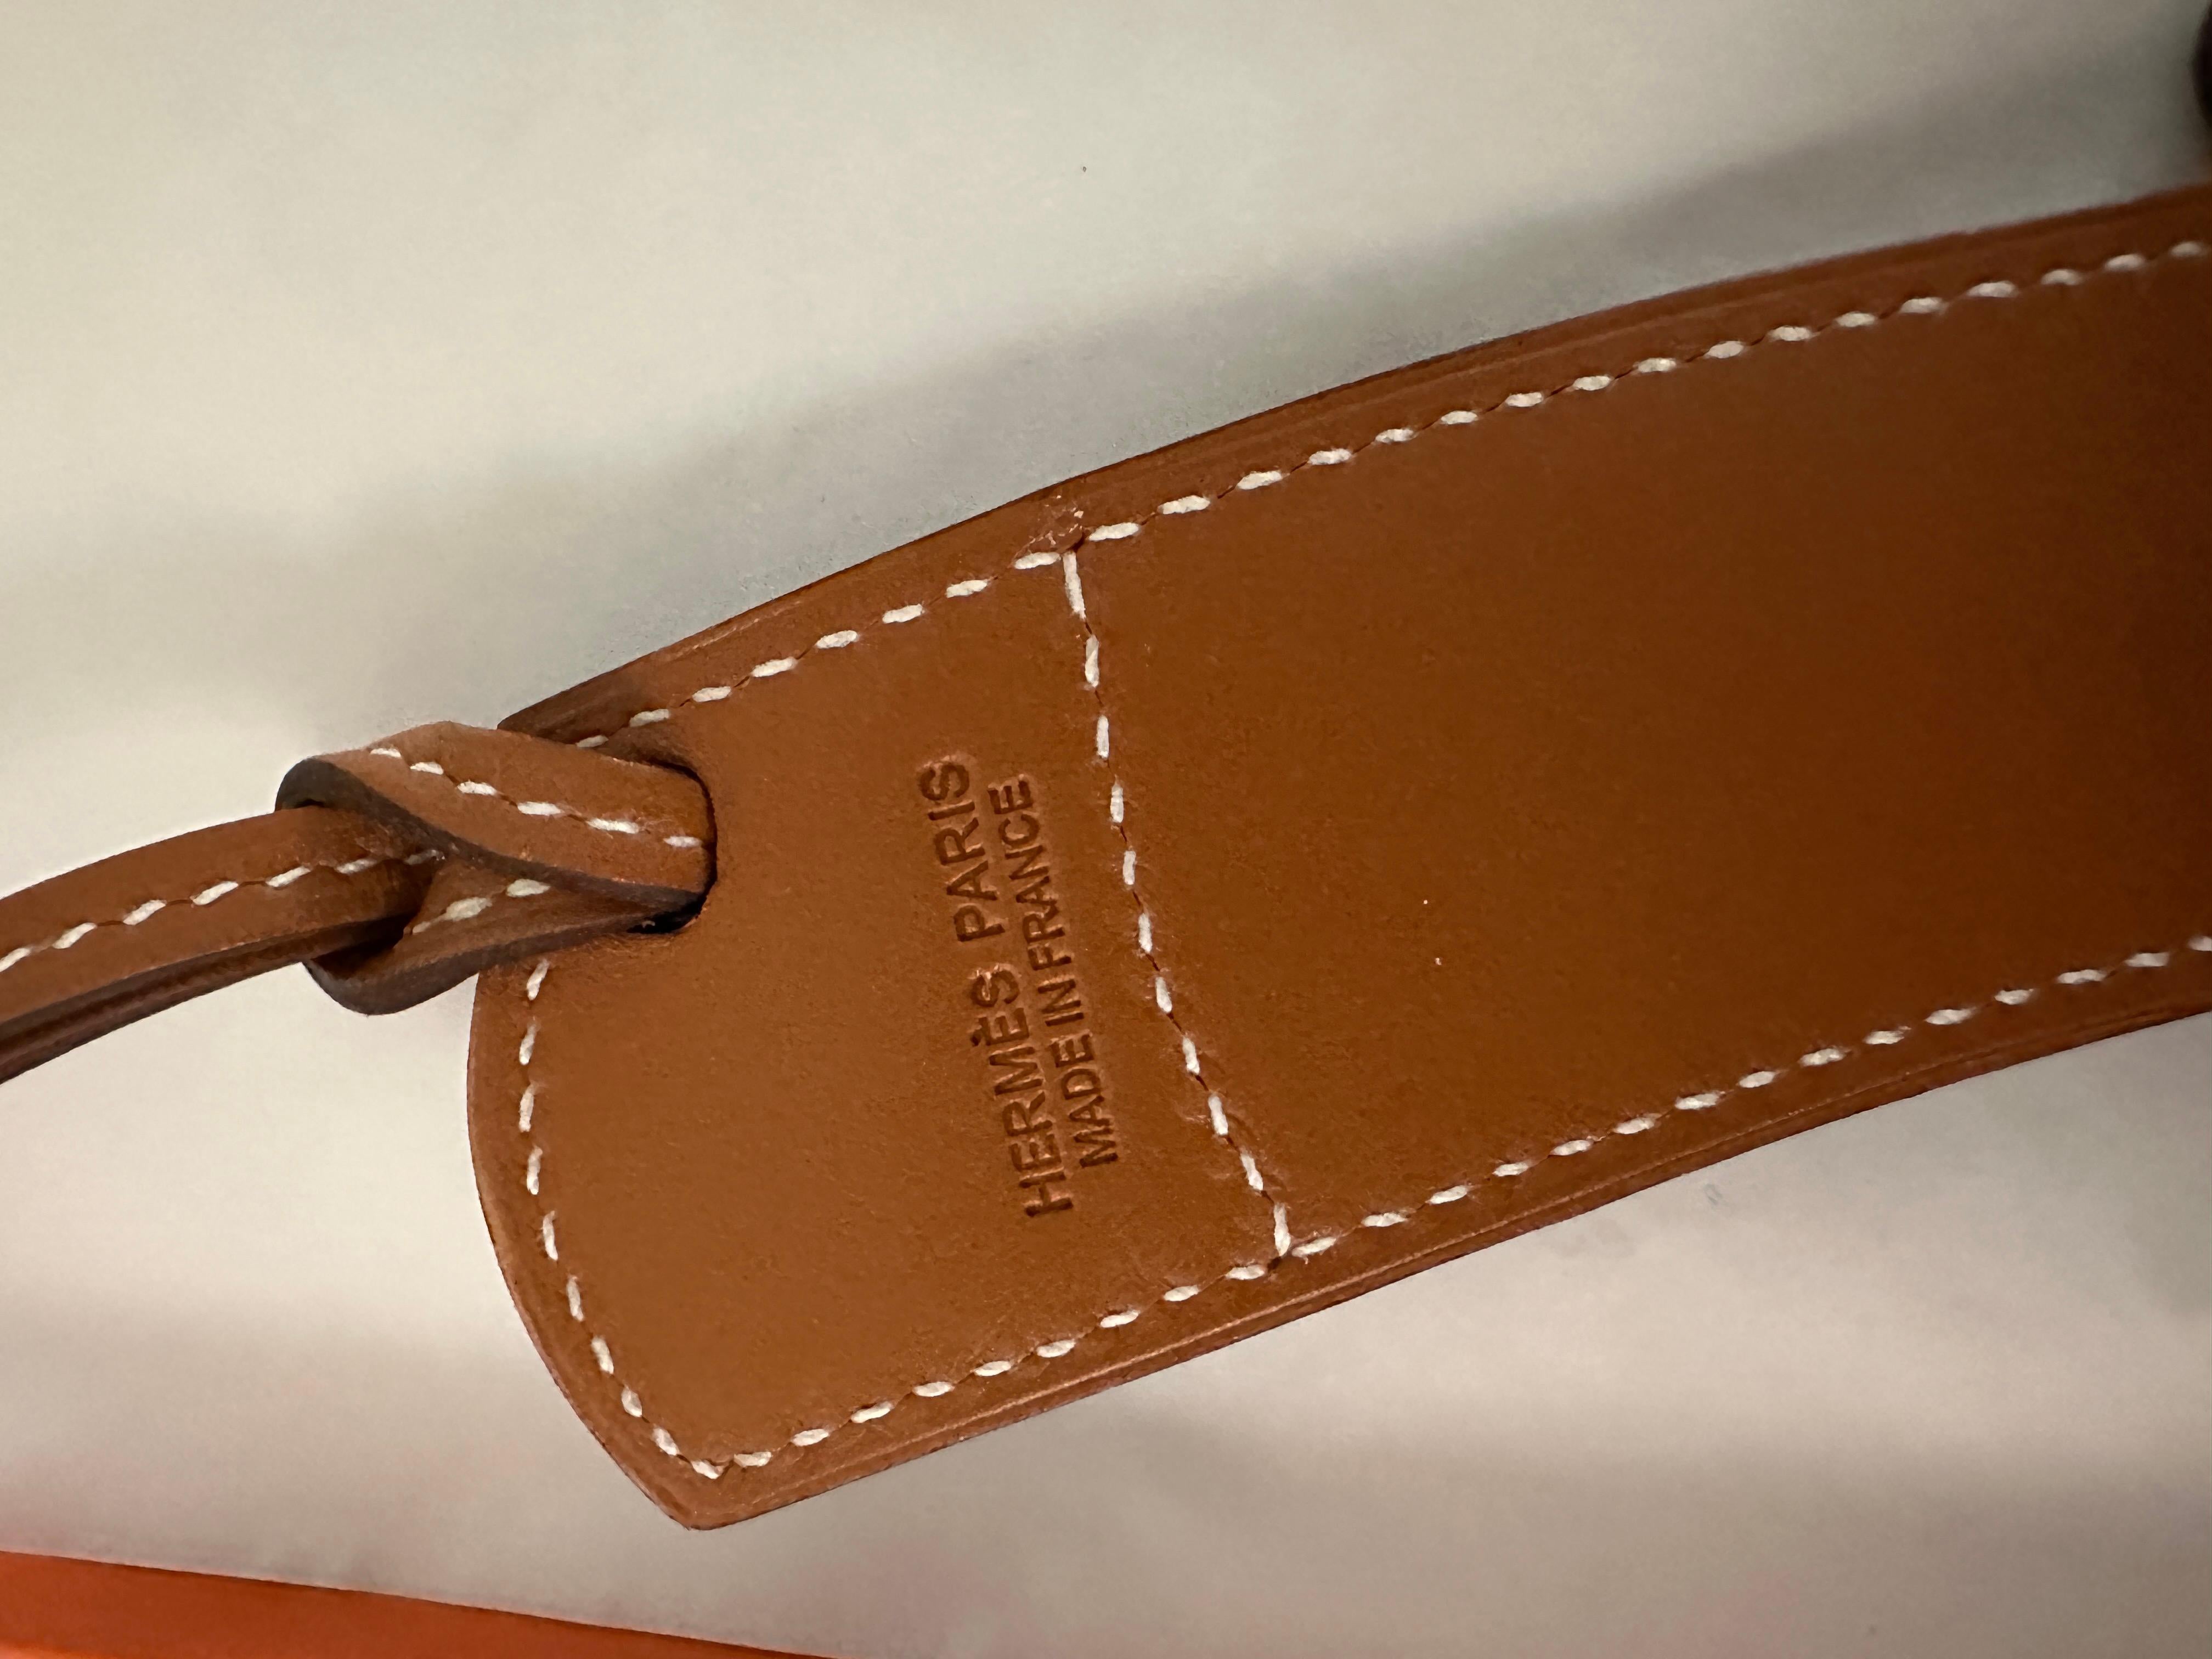 The Paddock Boot Charm
HERMES PADDOCK LEATHER BOOT CHARM
Naturel / Sable / Bleu 
How cute is this!
Equestrian Boot charm in Butler and Swift calfskin with palladium plated buckle
Comes in Hermes Box tissue and ribbon
Retail is $820 plus tax

Think